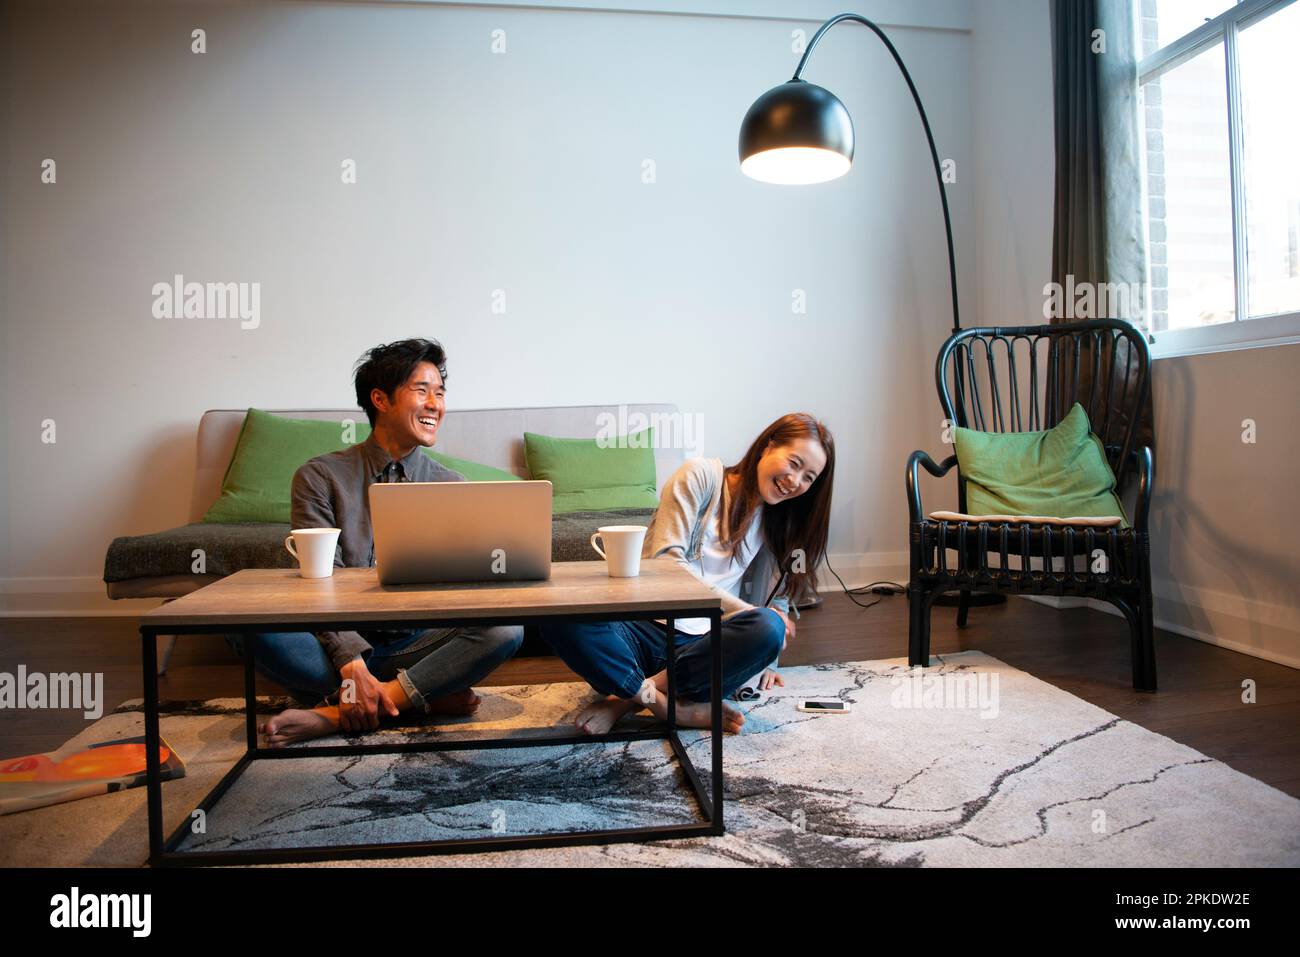 Couple relaxing in the living room Stock Photo